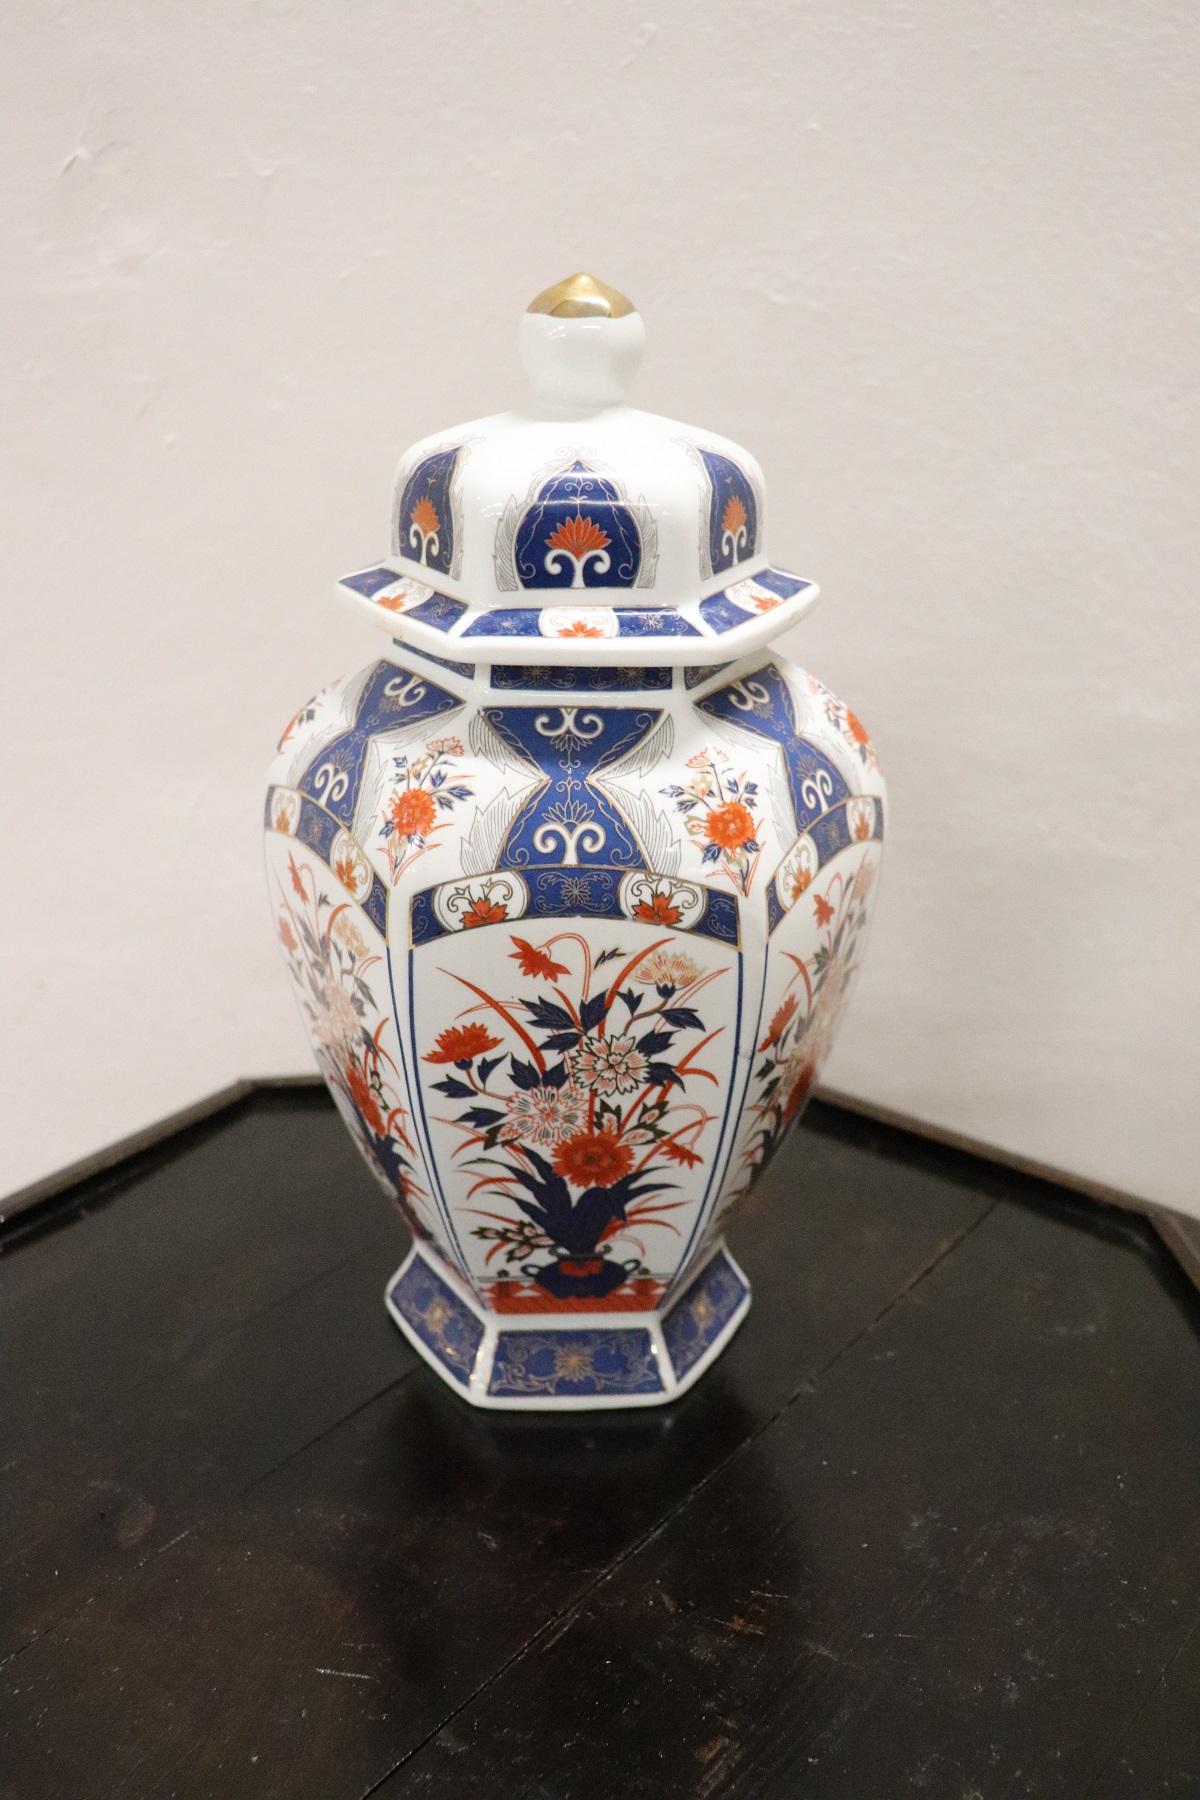 Refined polychrome porcelain vase, Japanese, 1980s. Beautiful hand painted decoration. Ideal for decorating an Asian style home. Brand at the base I.C.W royal Seoul.